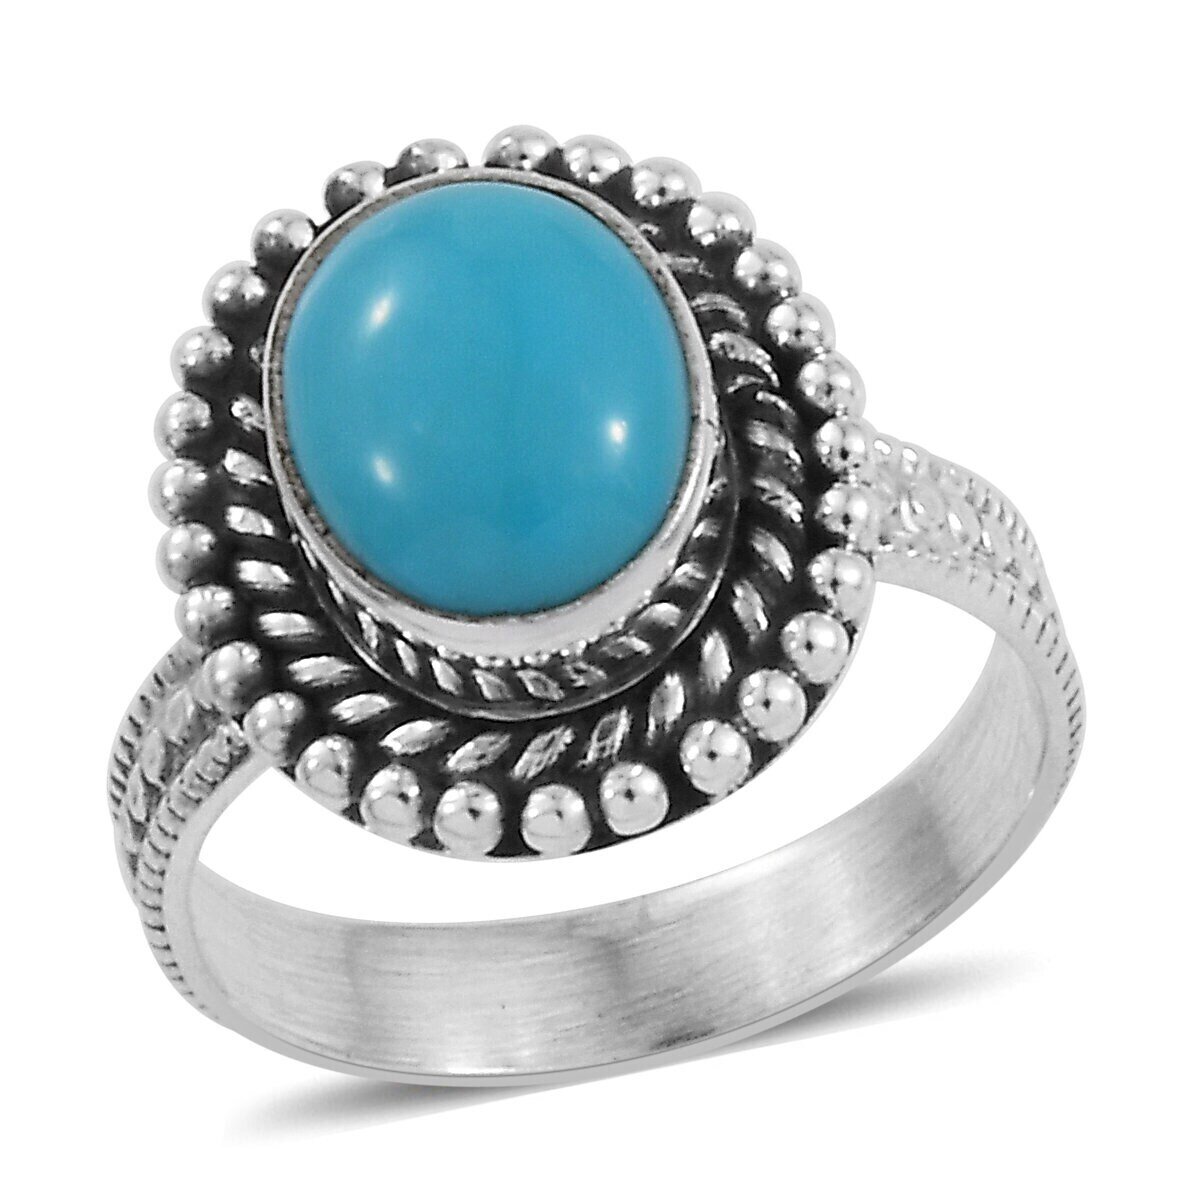 Sleeping Beauty Turquoise Top Quality Gemstone Ring 925-Antique Silver Ring,Sterling Silver Ring,Ring Finger Ring Anniversary Gift Ring